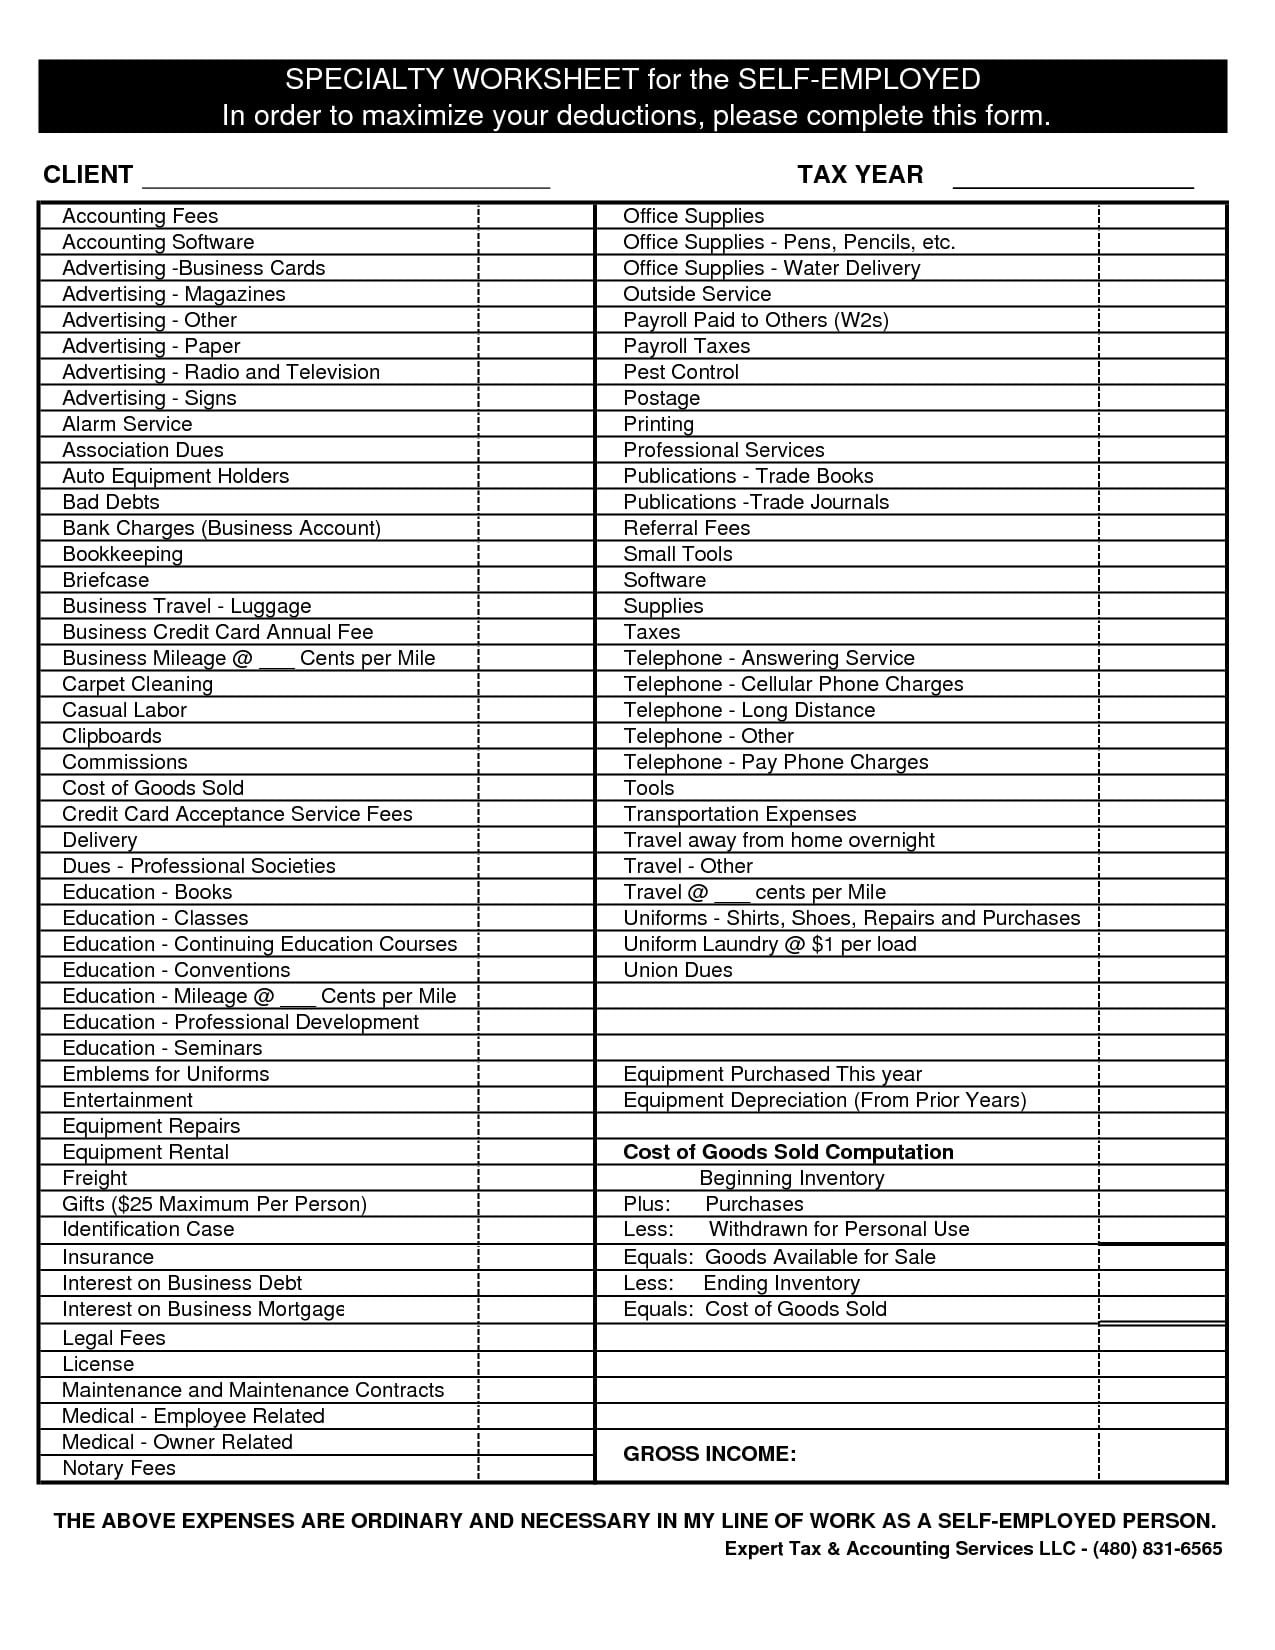 2017-self-employment-tax-and-deduction-worksheet-db-excel